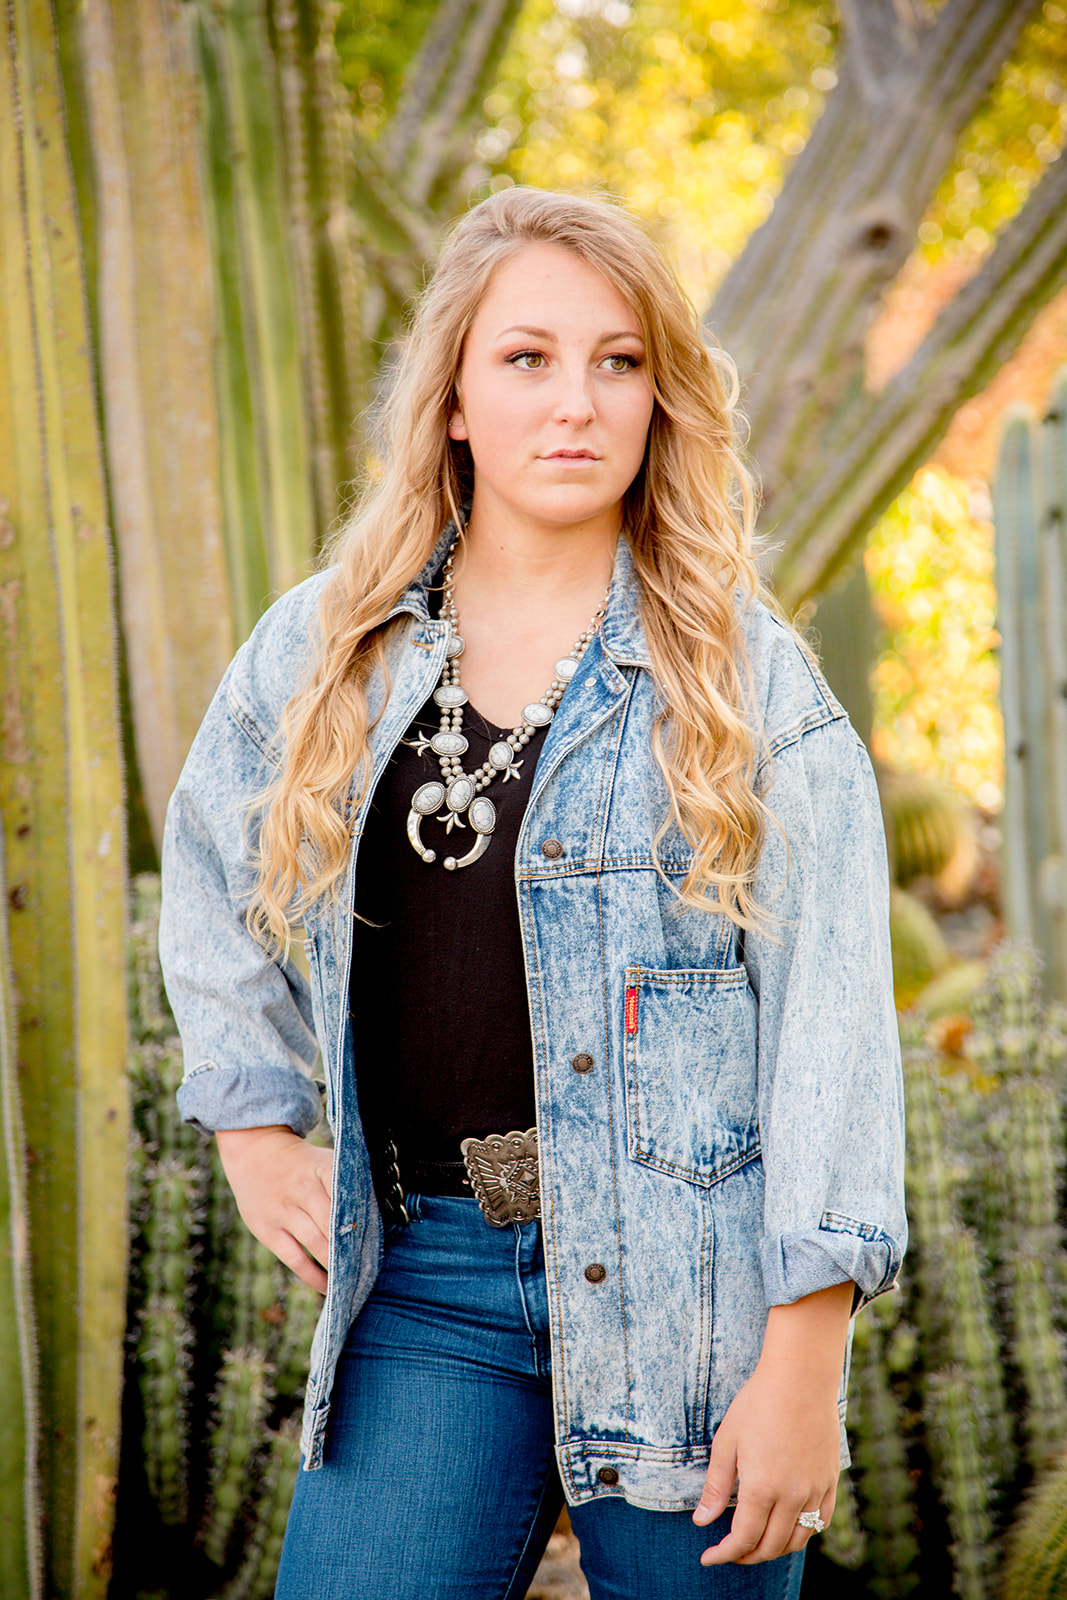 Cal Poly senior wearing jean jacket for western styled photoshoot at the Cal Poly campus